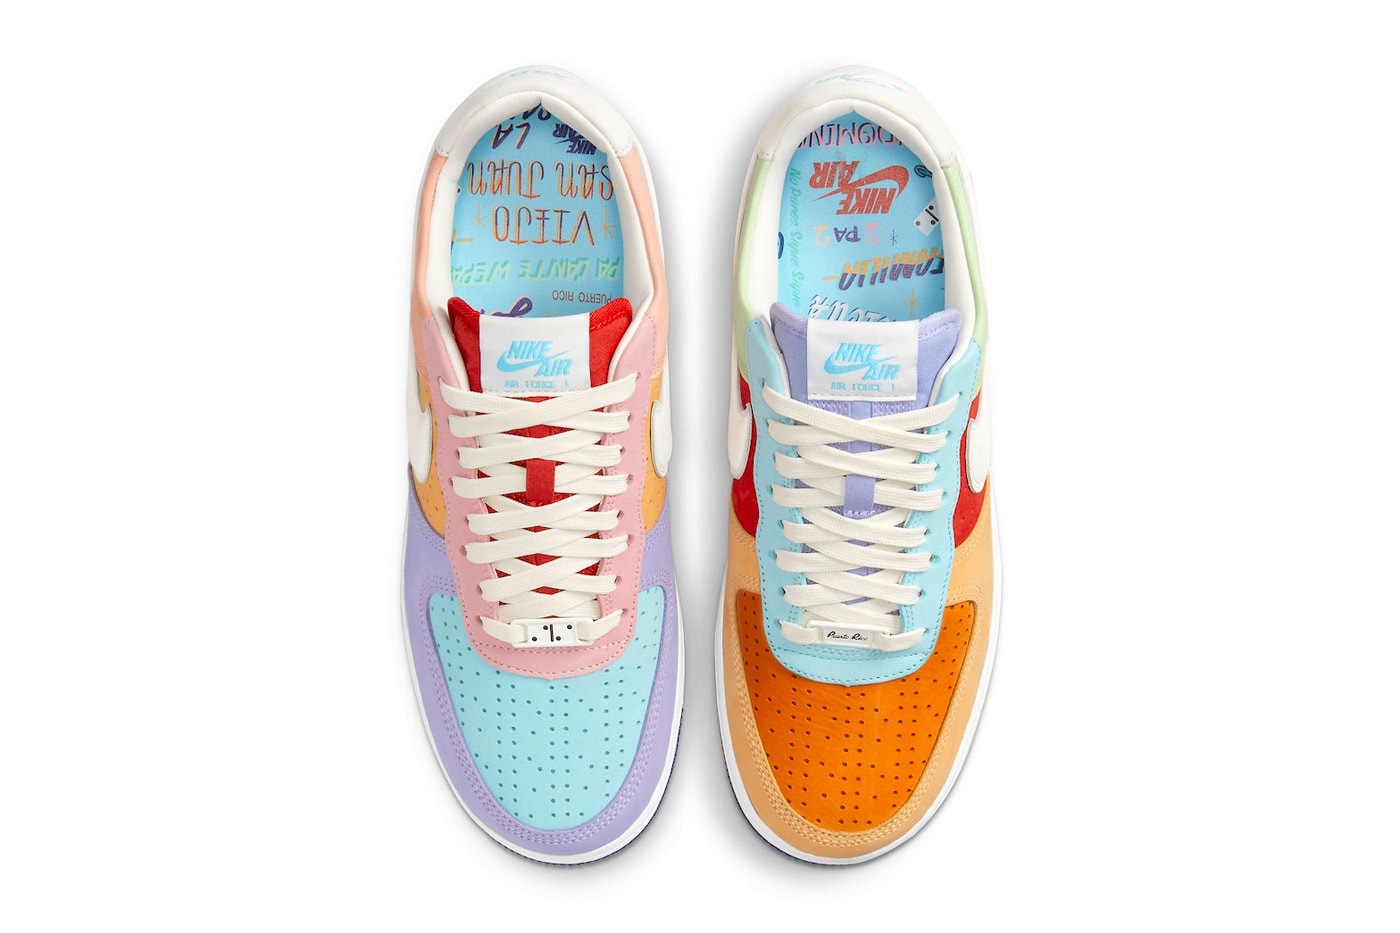  Nike Air Force 1 Low Boricua puerto rican day DX6504-900 Release Info